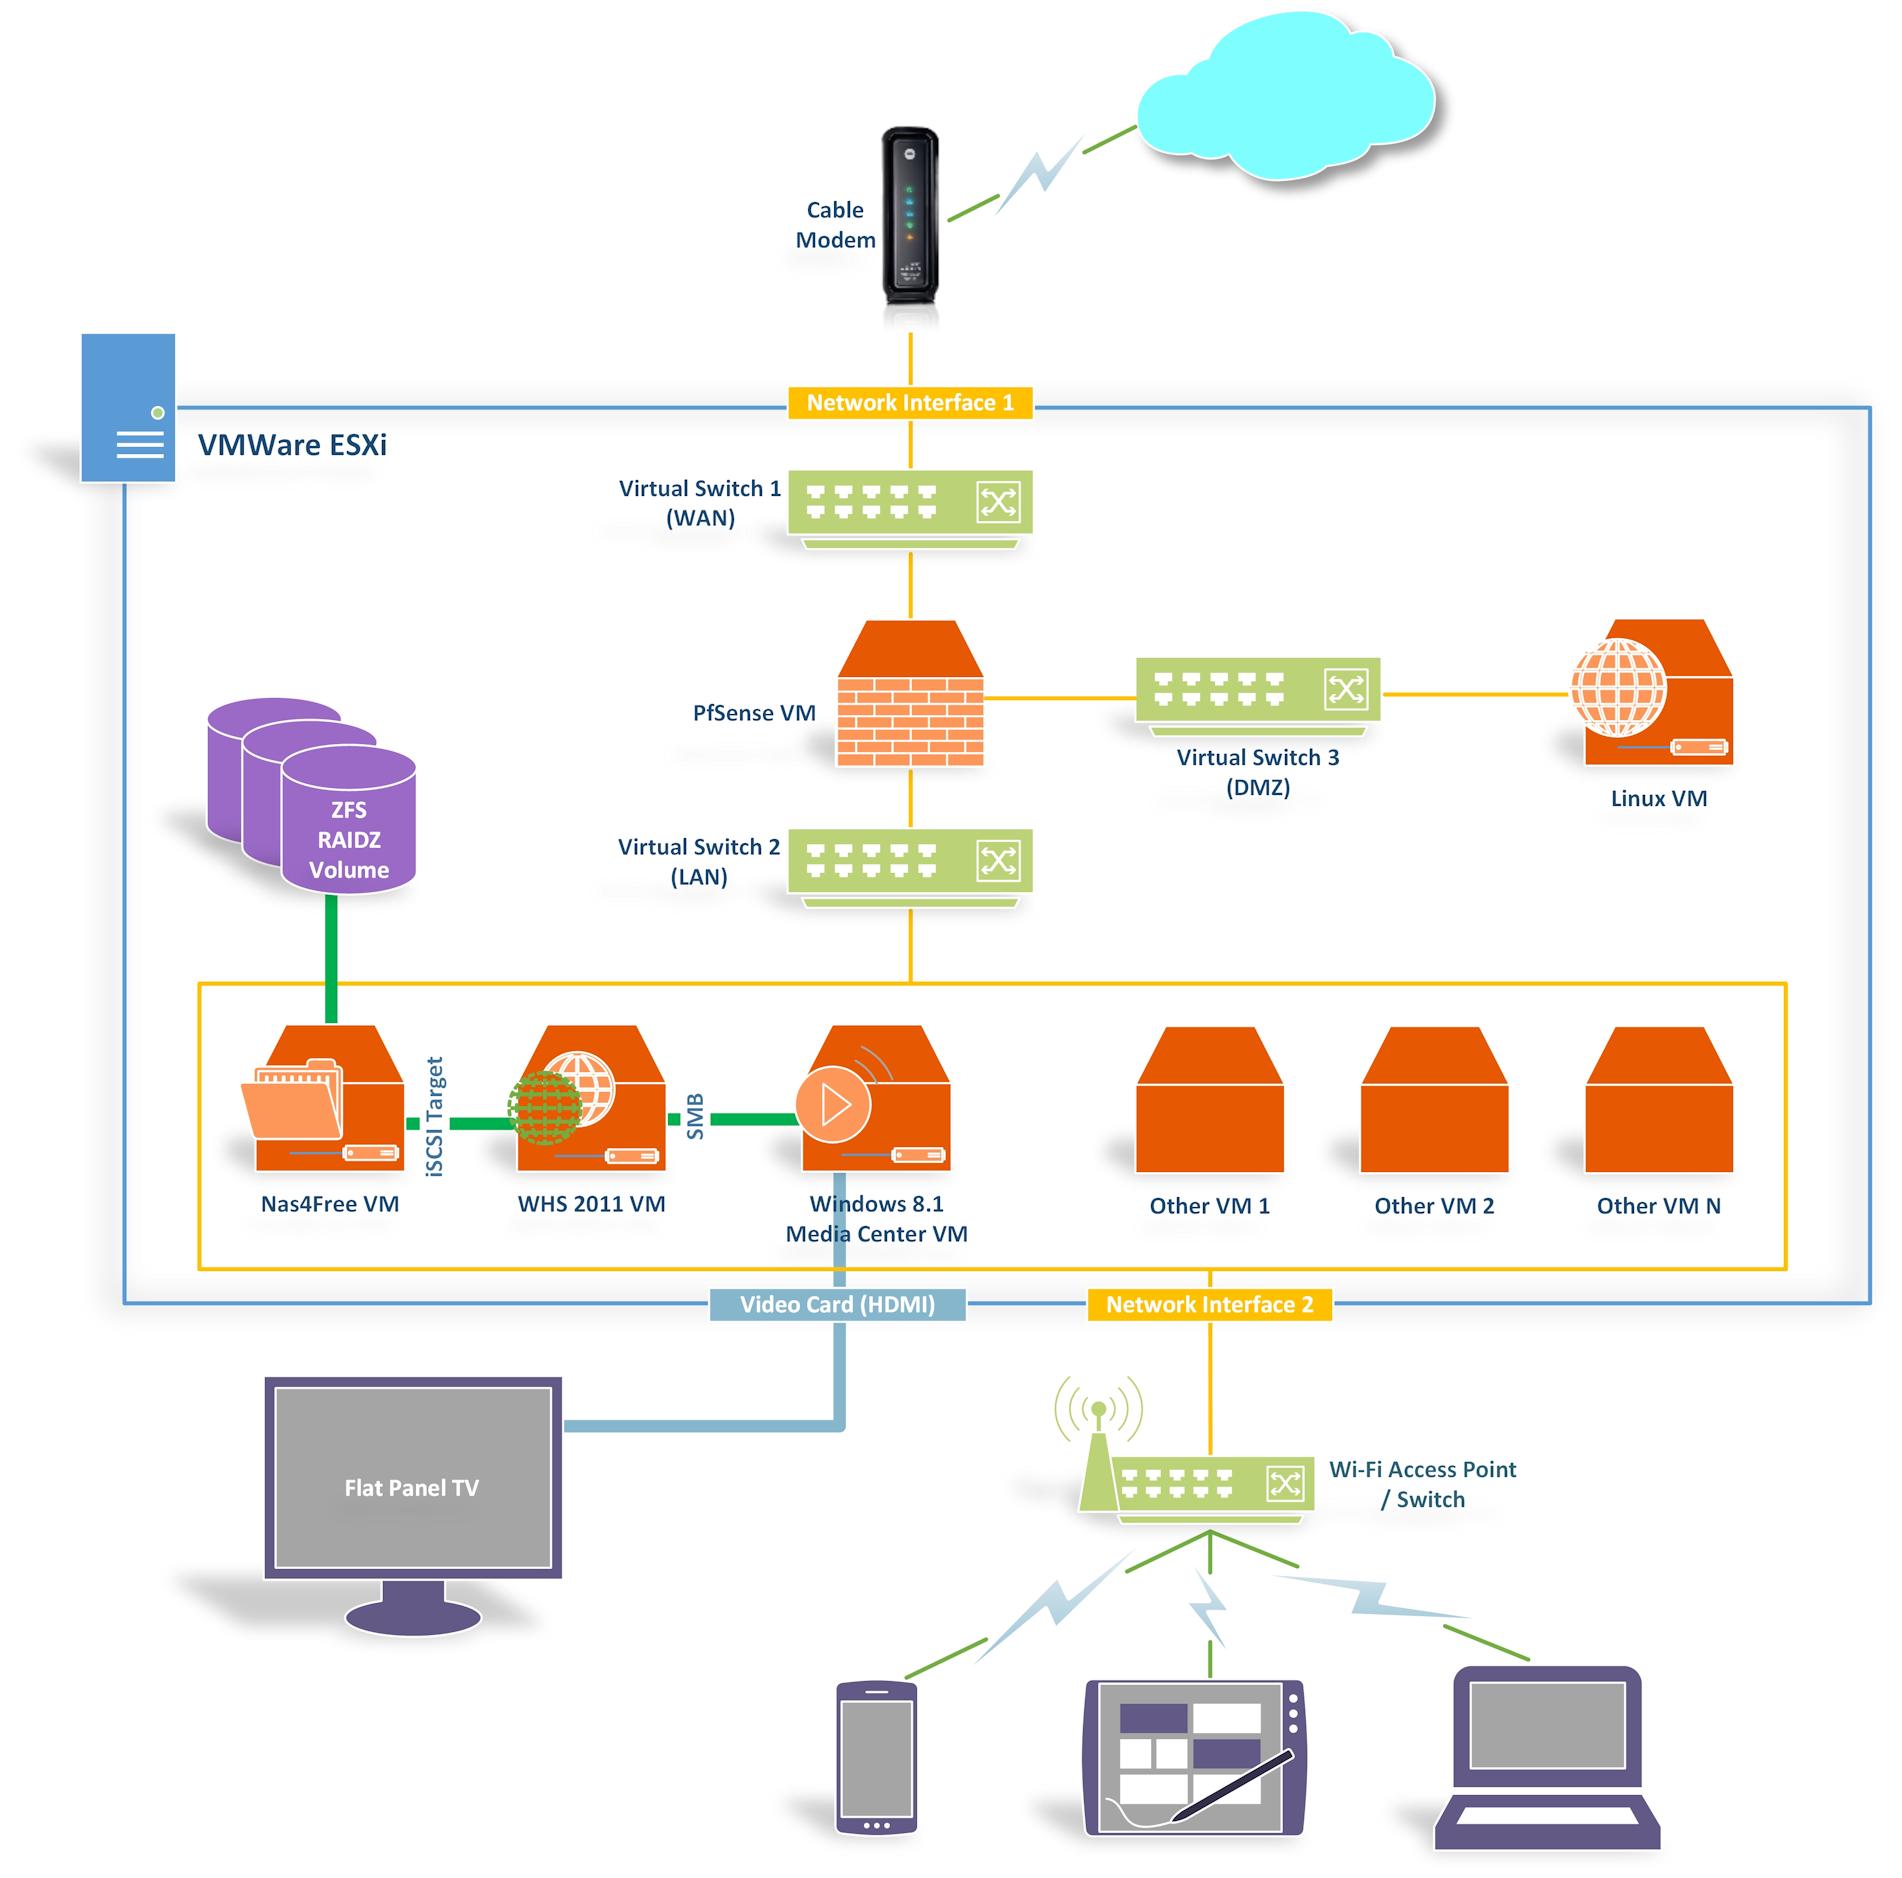 The Virtualized Home